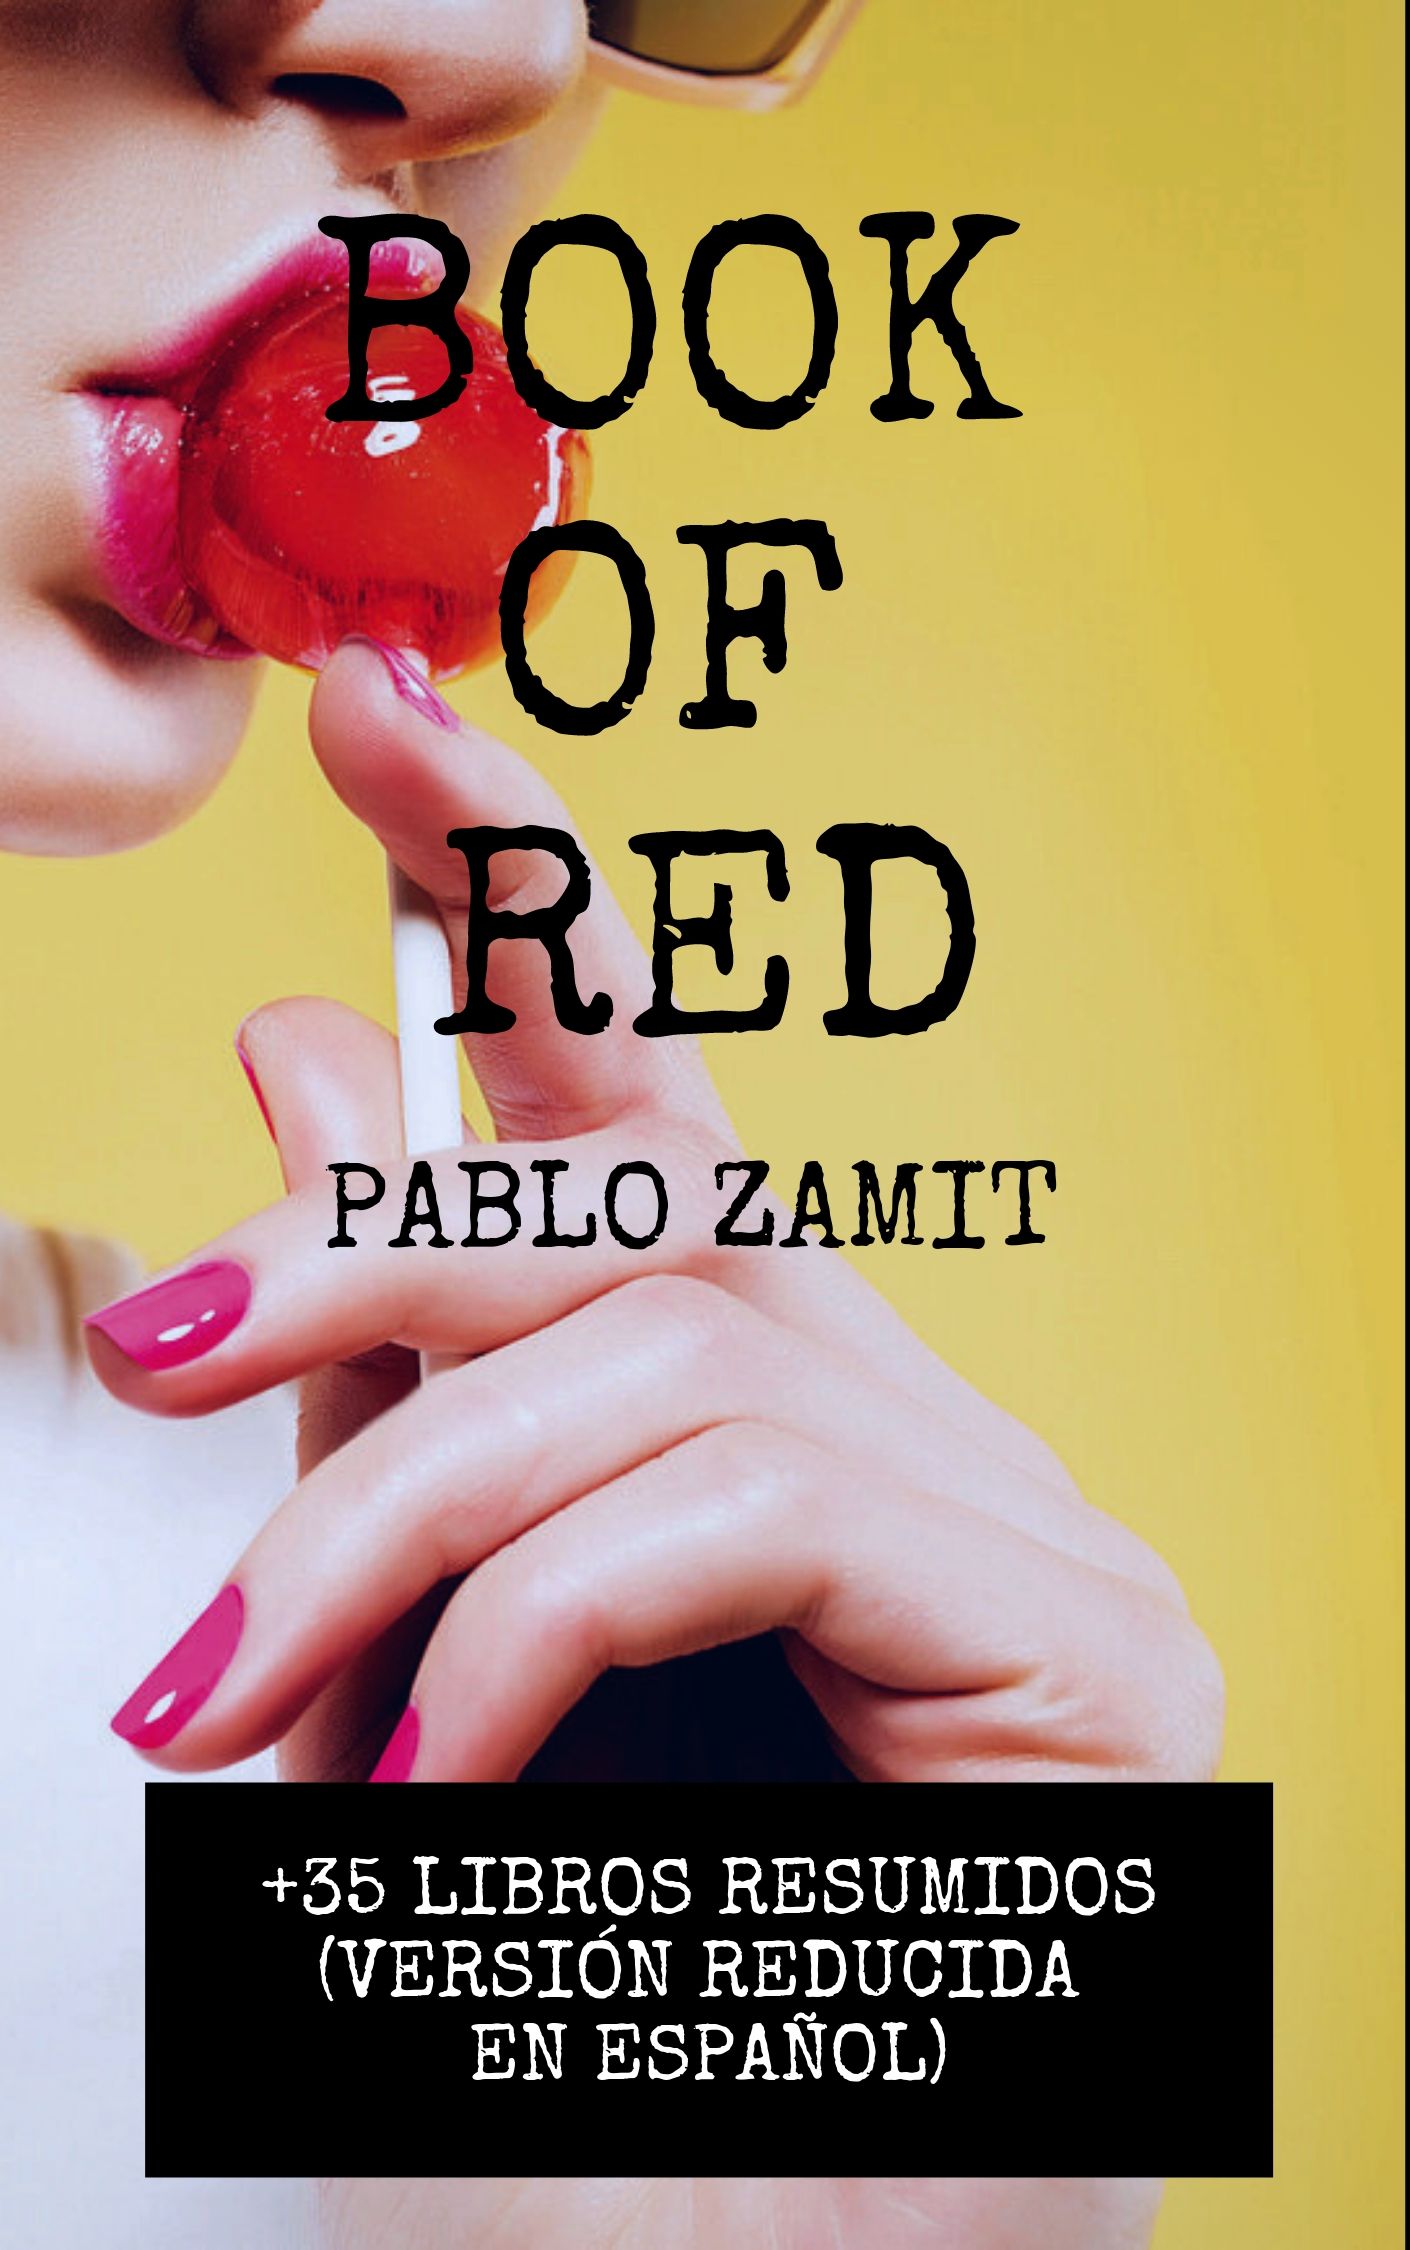 book-of-red-1.jpg